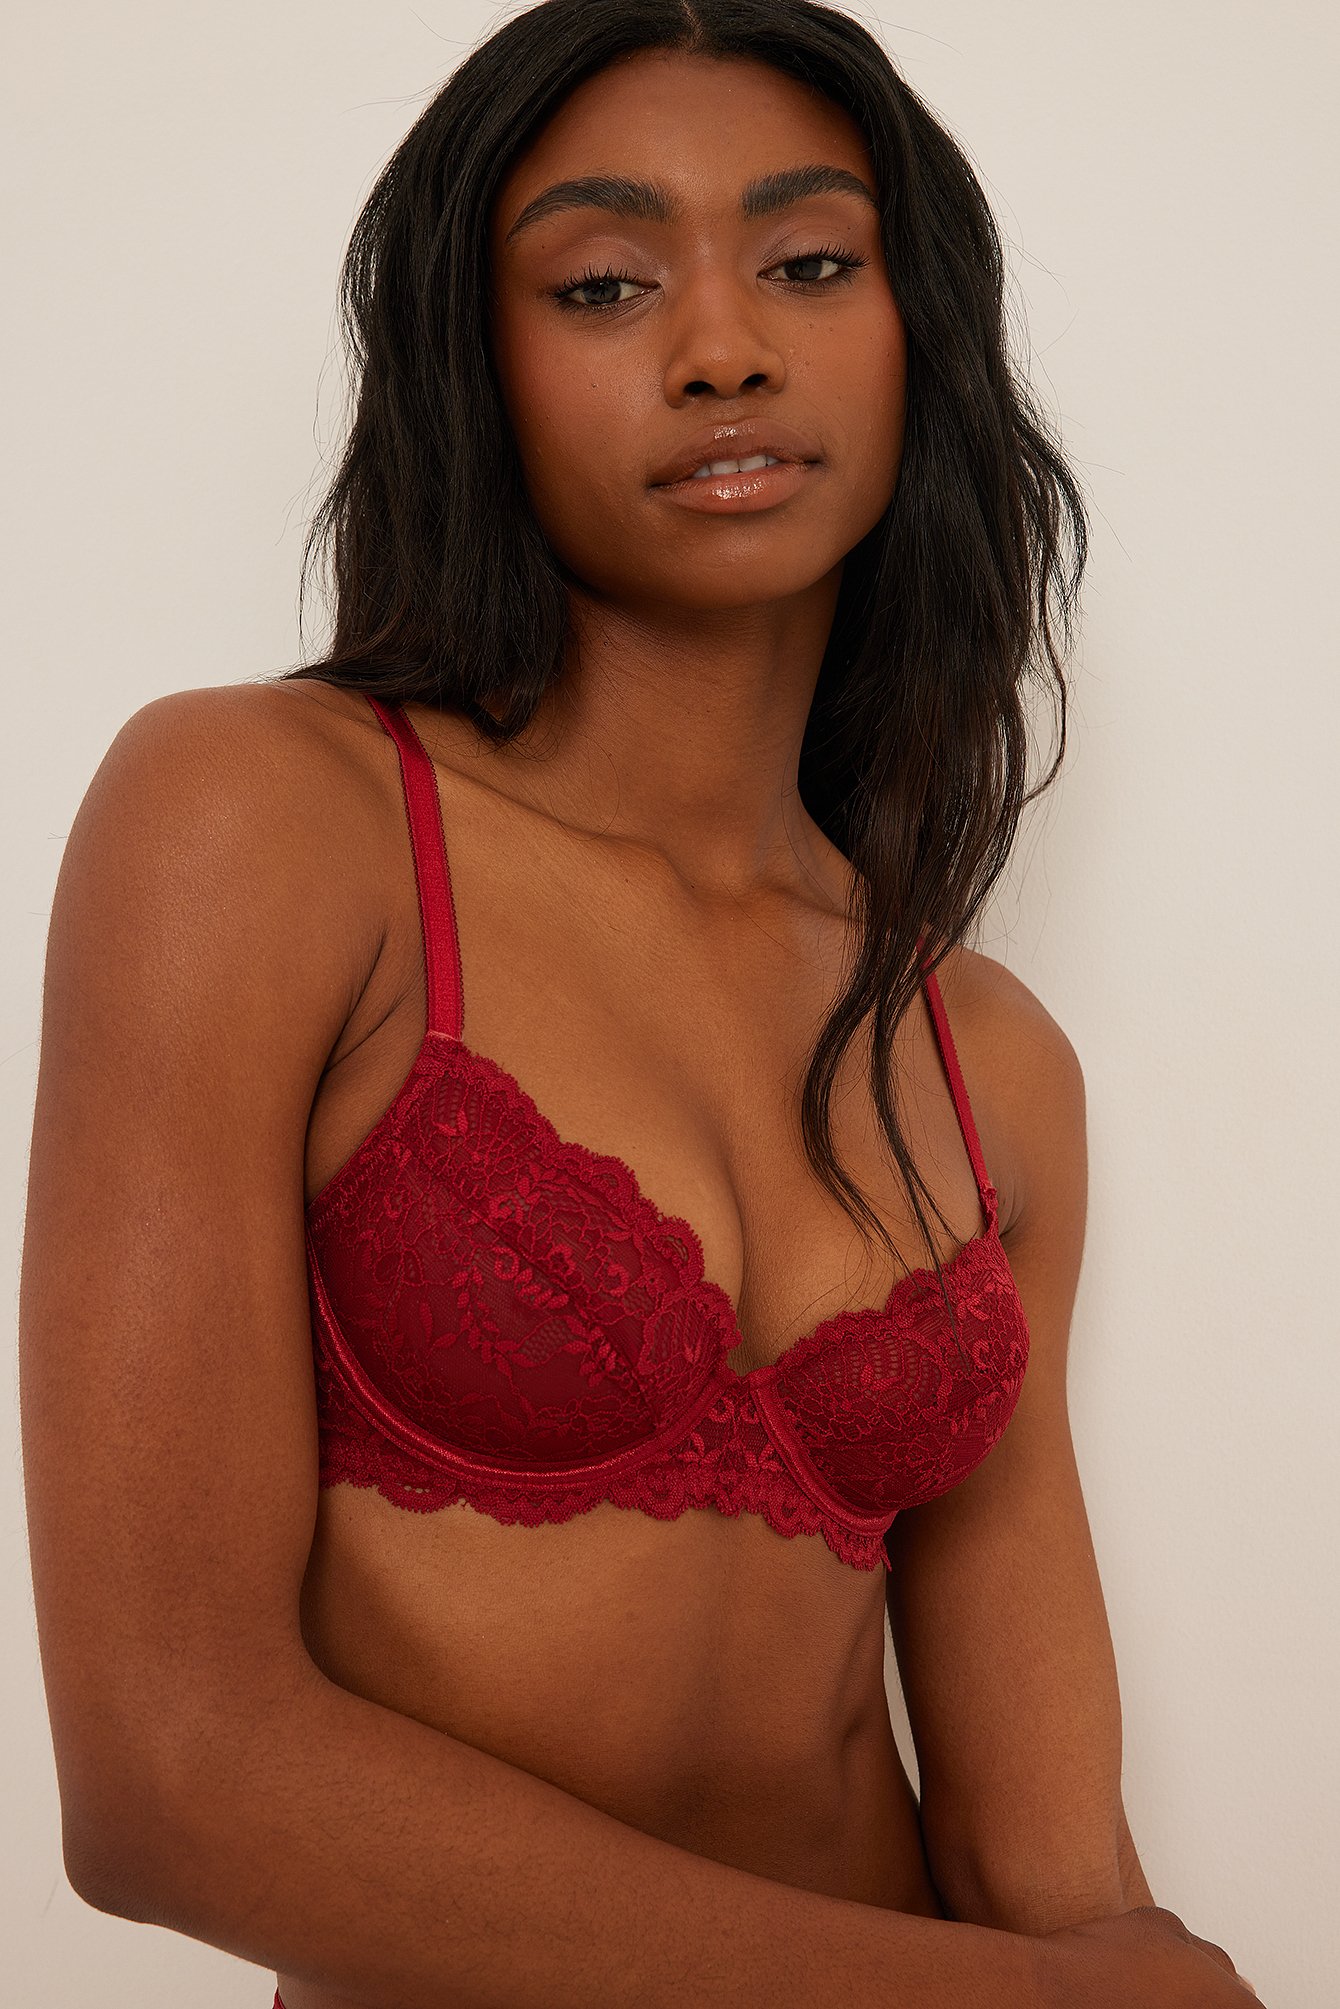 Victoria Secret push-up bra size 36C. Red and black lace with a bow tie.